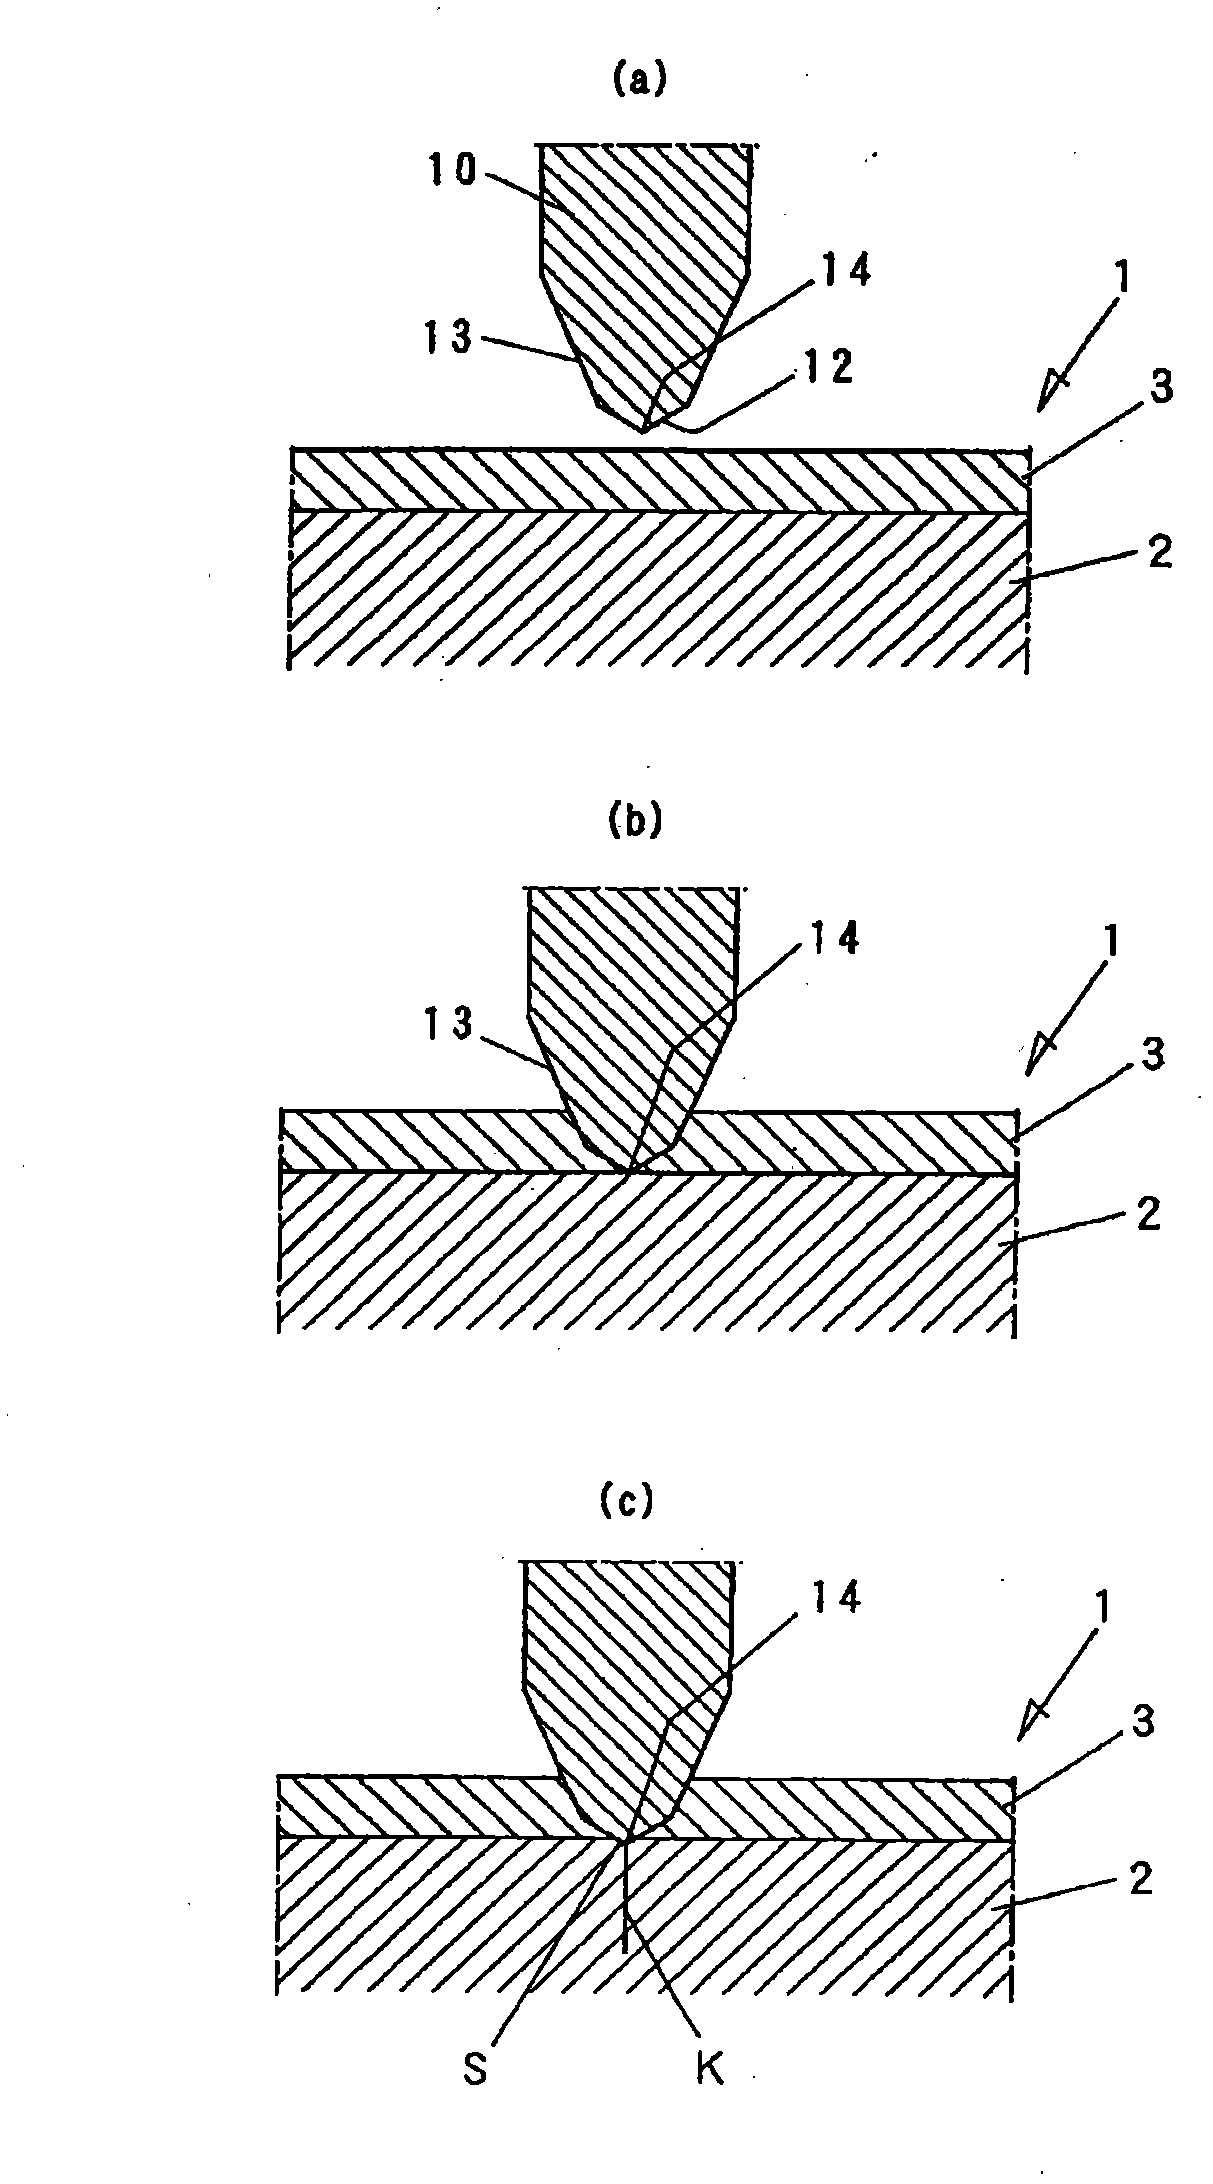 A method for scribing a brittle material substrate